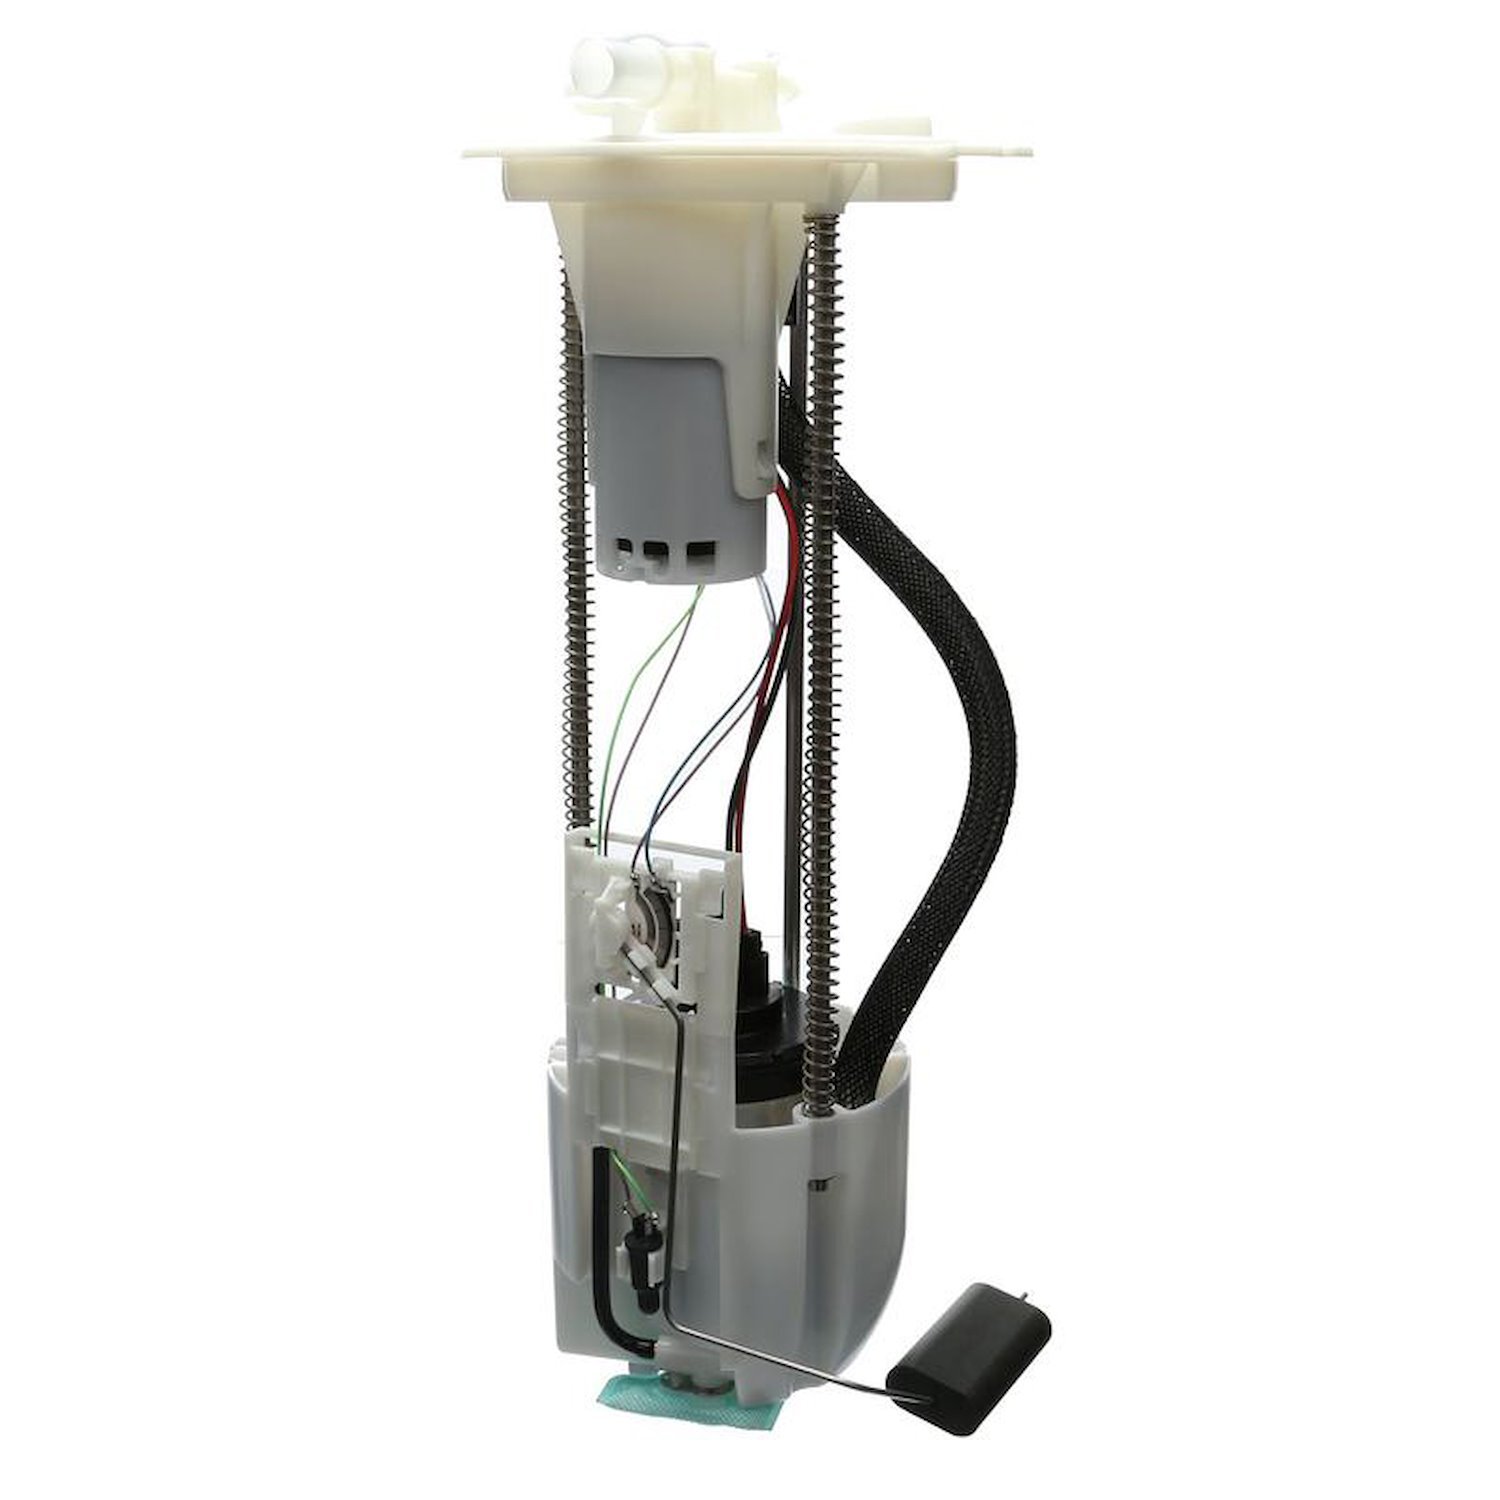 OE Replacement Fuel Pump Module Assembly for 2005-2012 Nissan Titan/2007-2015 Nissan Armada